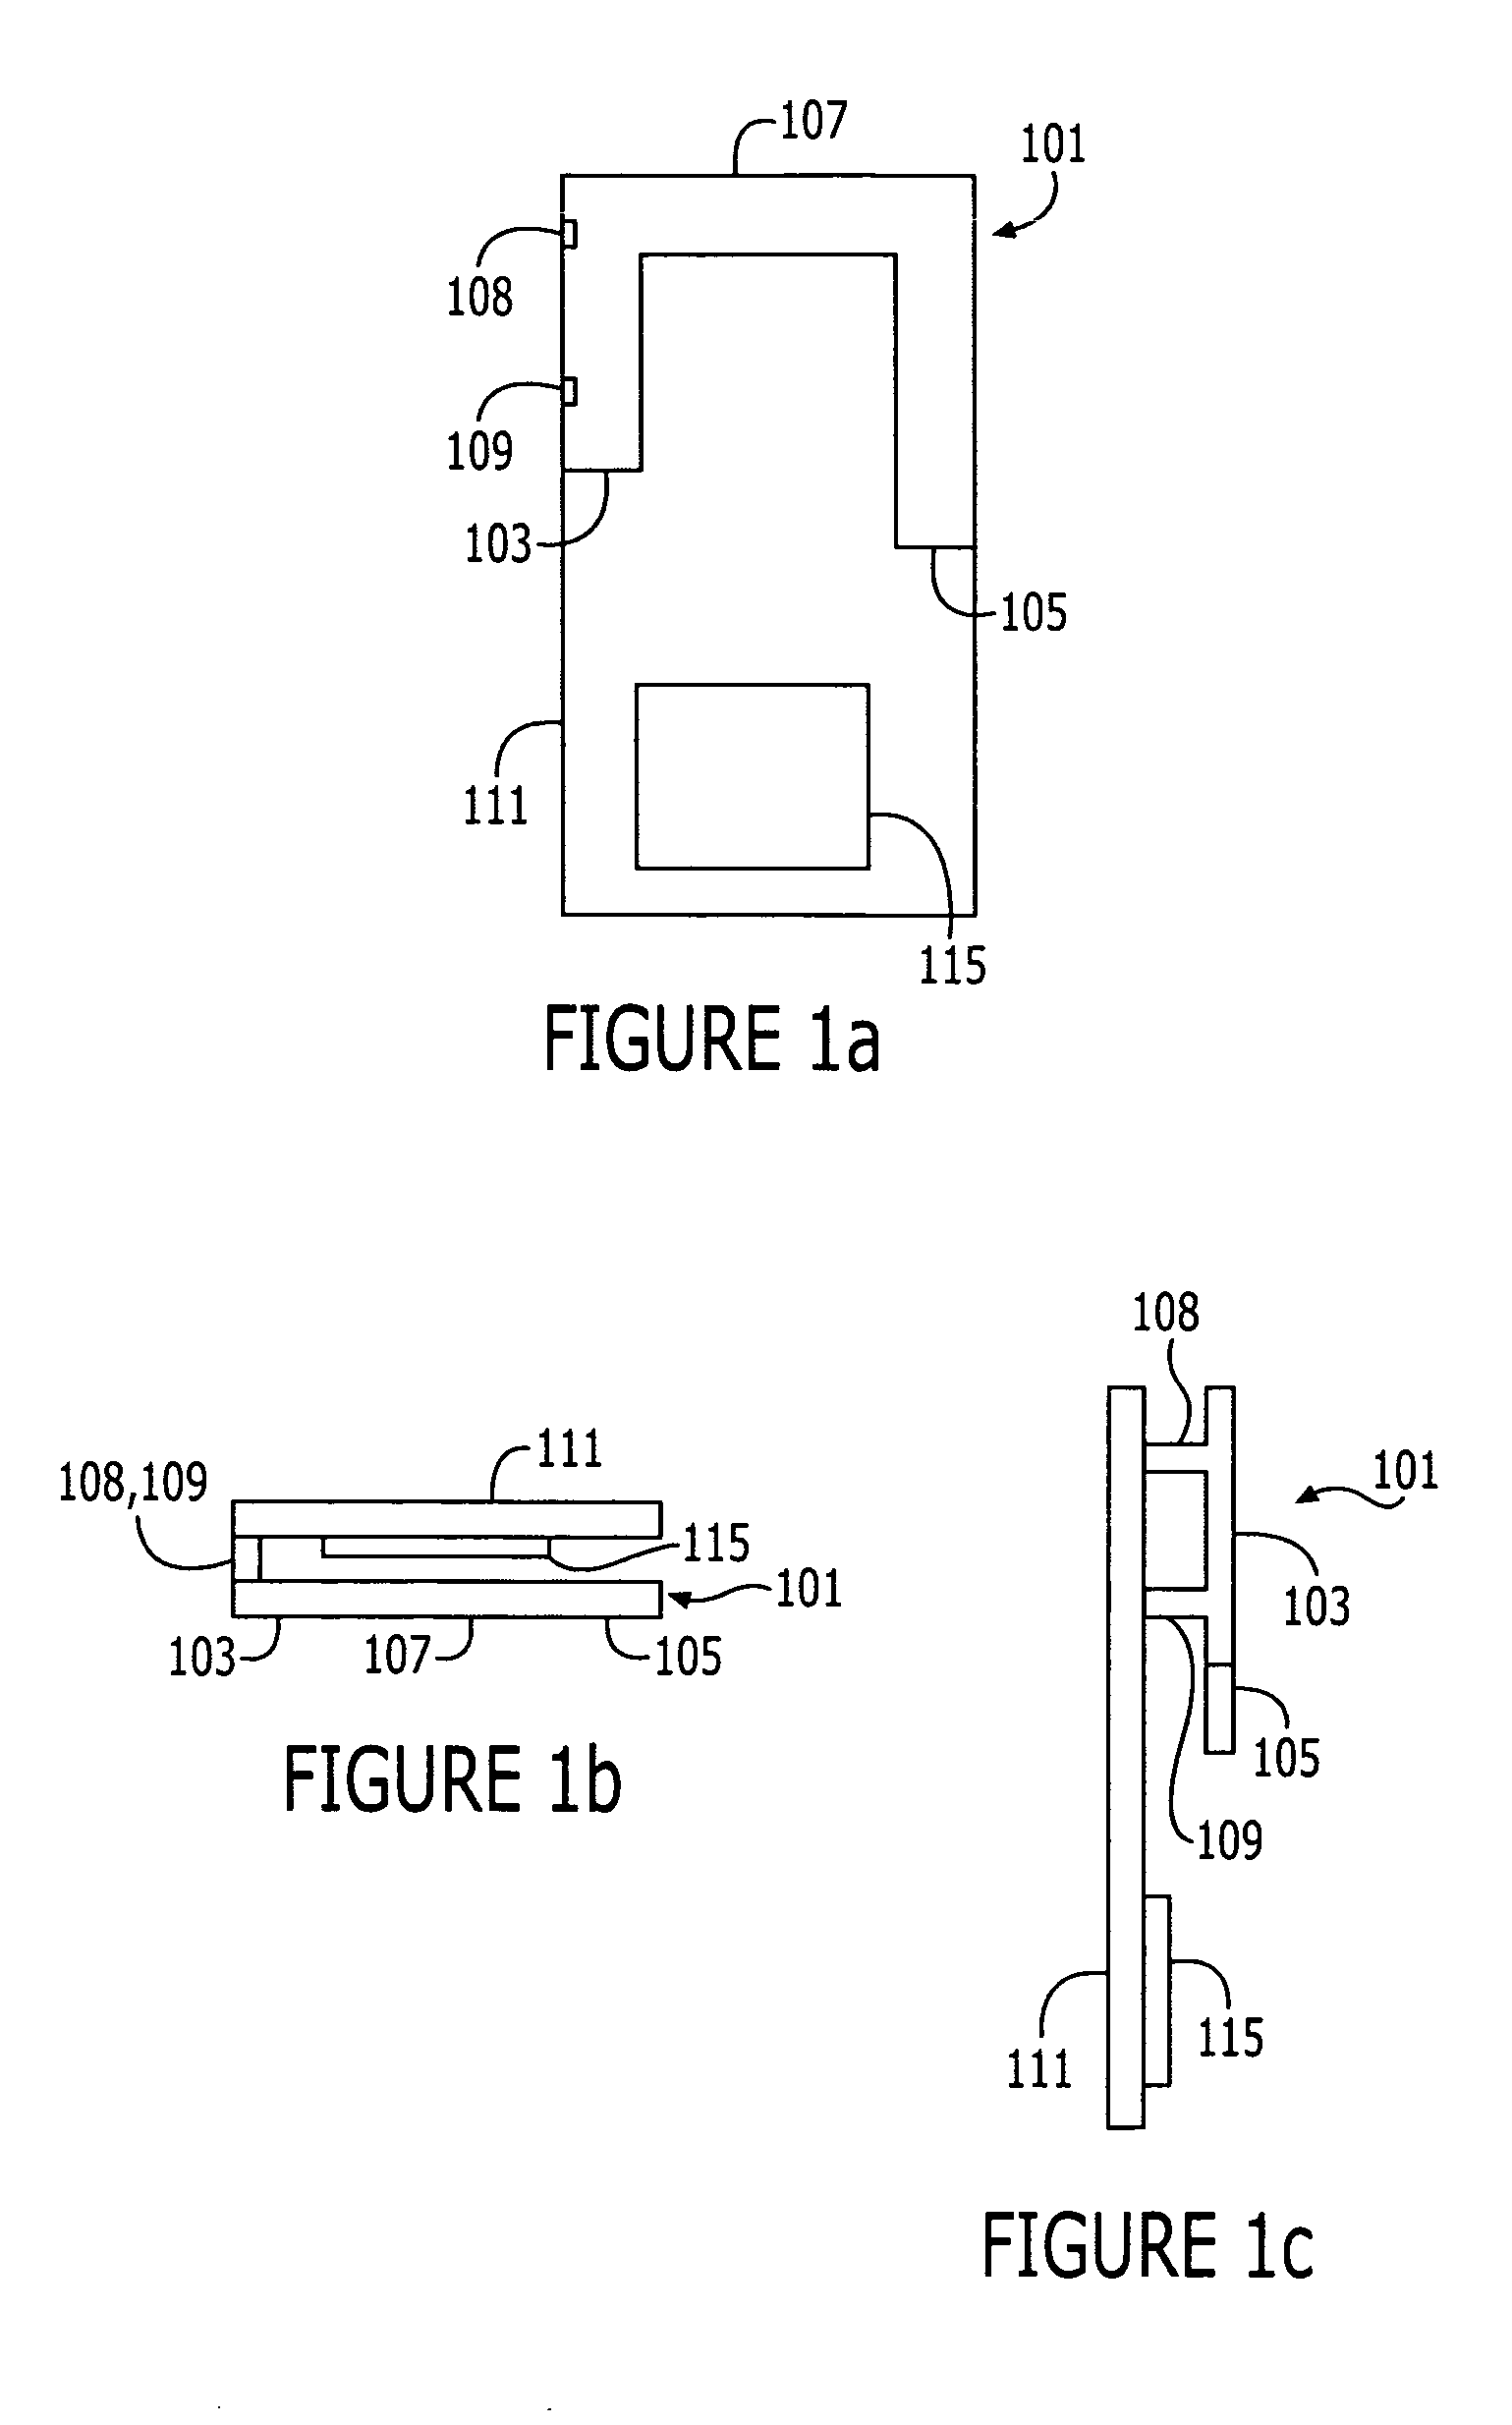 Planar inverted F antennas including current nulls between feed and ground couplings and related communications devices